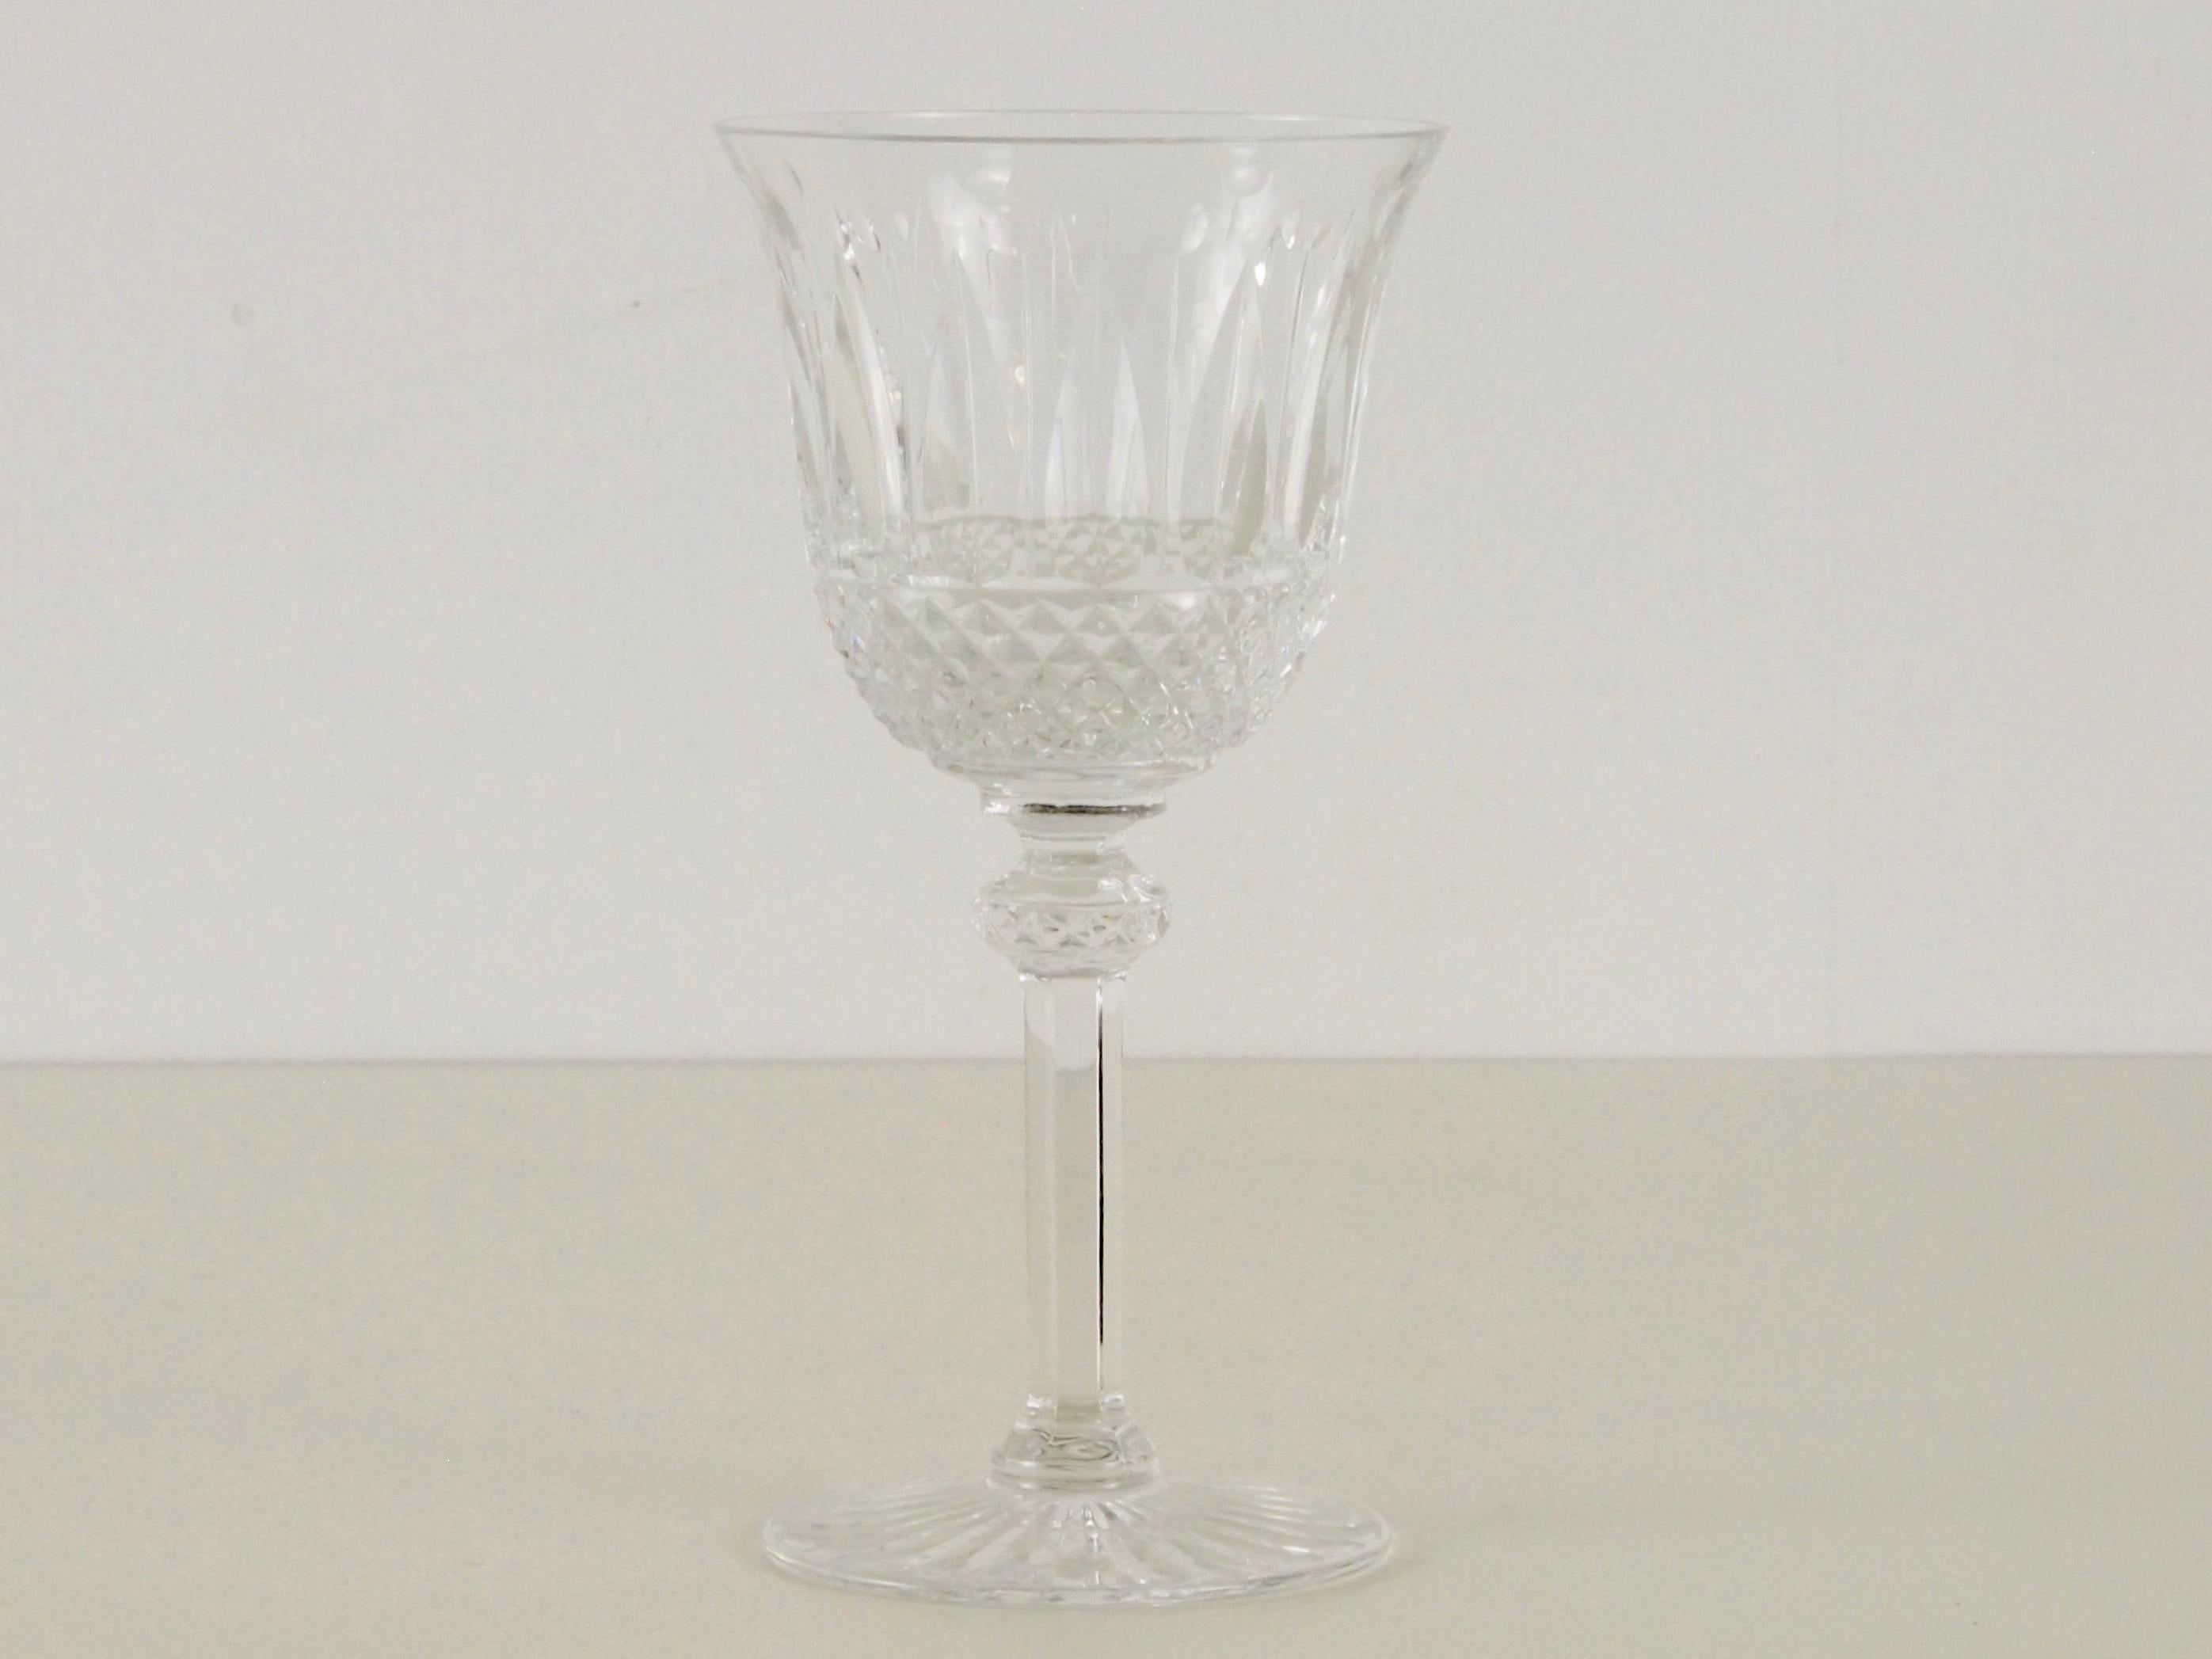 Very rare extensive set of vintage crystal glasses by St. Louis, Crystal, France. 

All glasses are very fine handcut in an exceptional pattern. French cut-crystal is renowned for quality and style. St. Louis, still operating today, is one of